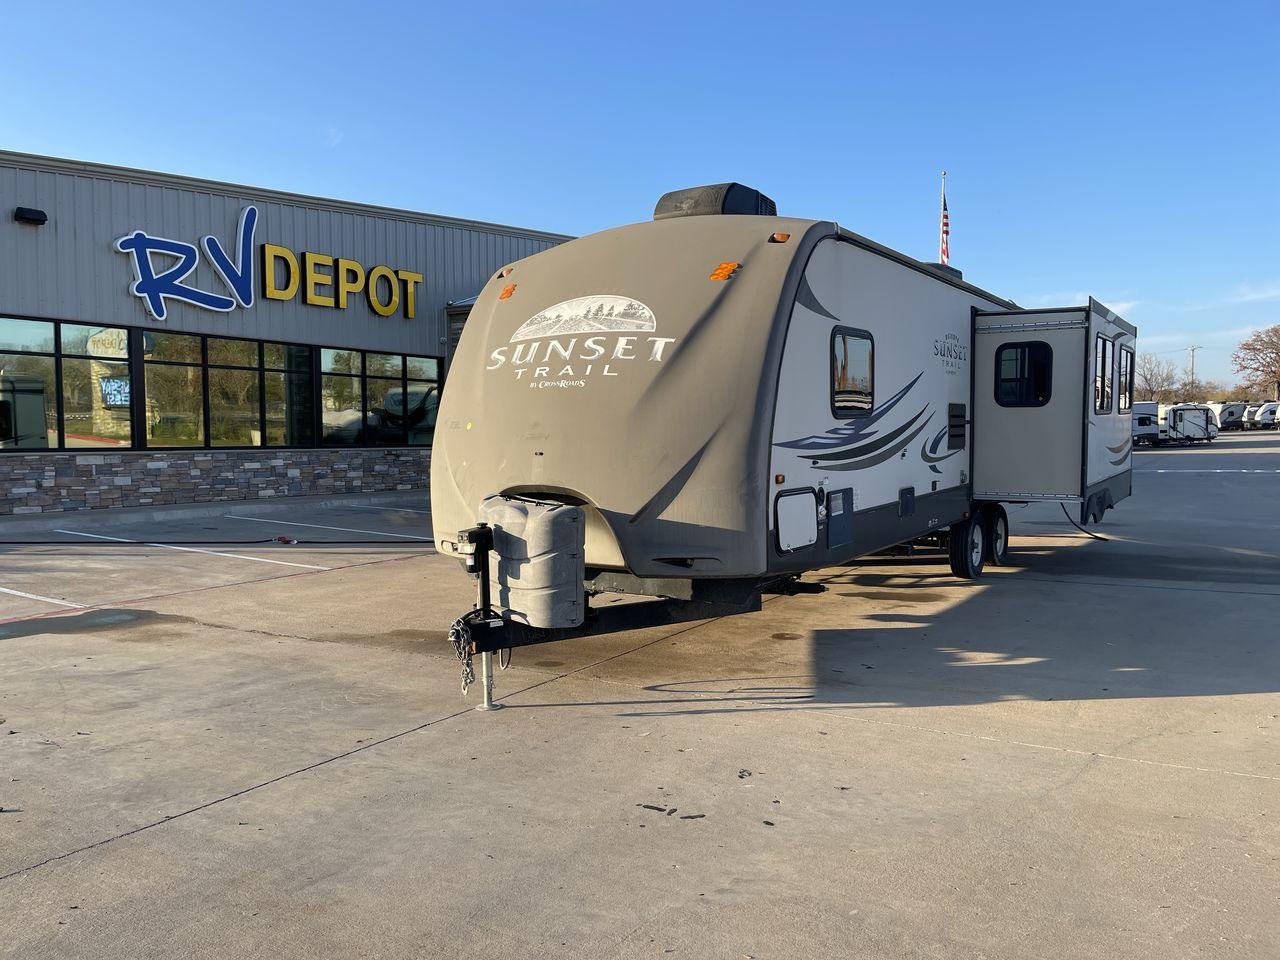 2013 TAN SUNSET TRAIL 30RE - (4V0TC3029DB) , Length: 34.42 ft.| Dry Weight: 6,288 lbs. | Gross Weight: 9,500 lbs. | Slides: 1 transmission, located at 4319 N Main Street, Cleburne, TX, 76033, (817) 221-0660, 32.435829, -97.384178 - The 2013 Sunset Trail 30RE CT offers the ideal balance of comfort and flair. This travel trailer is 34.42 feet long, so there's plenty of room for you and your loved ones to relax. With a dry weight of 6,288 pounds and a gross weight of 9,500 pounds, it provides an excellent balance of durability an - Photo #0